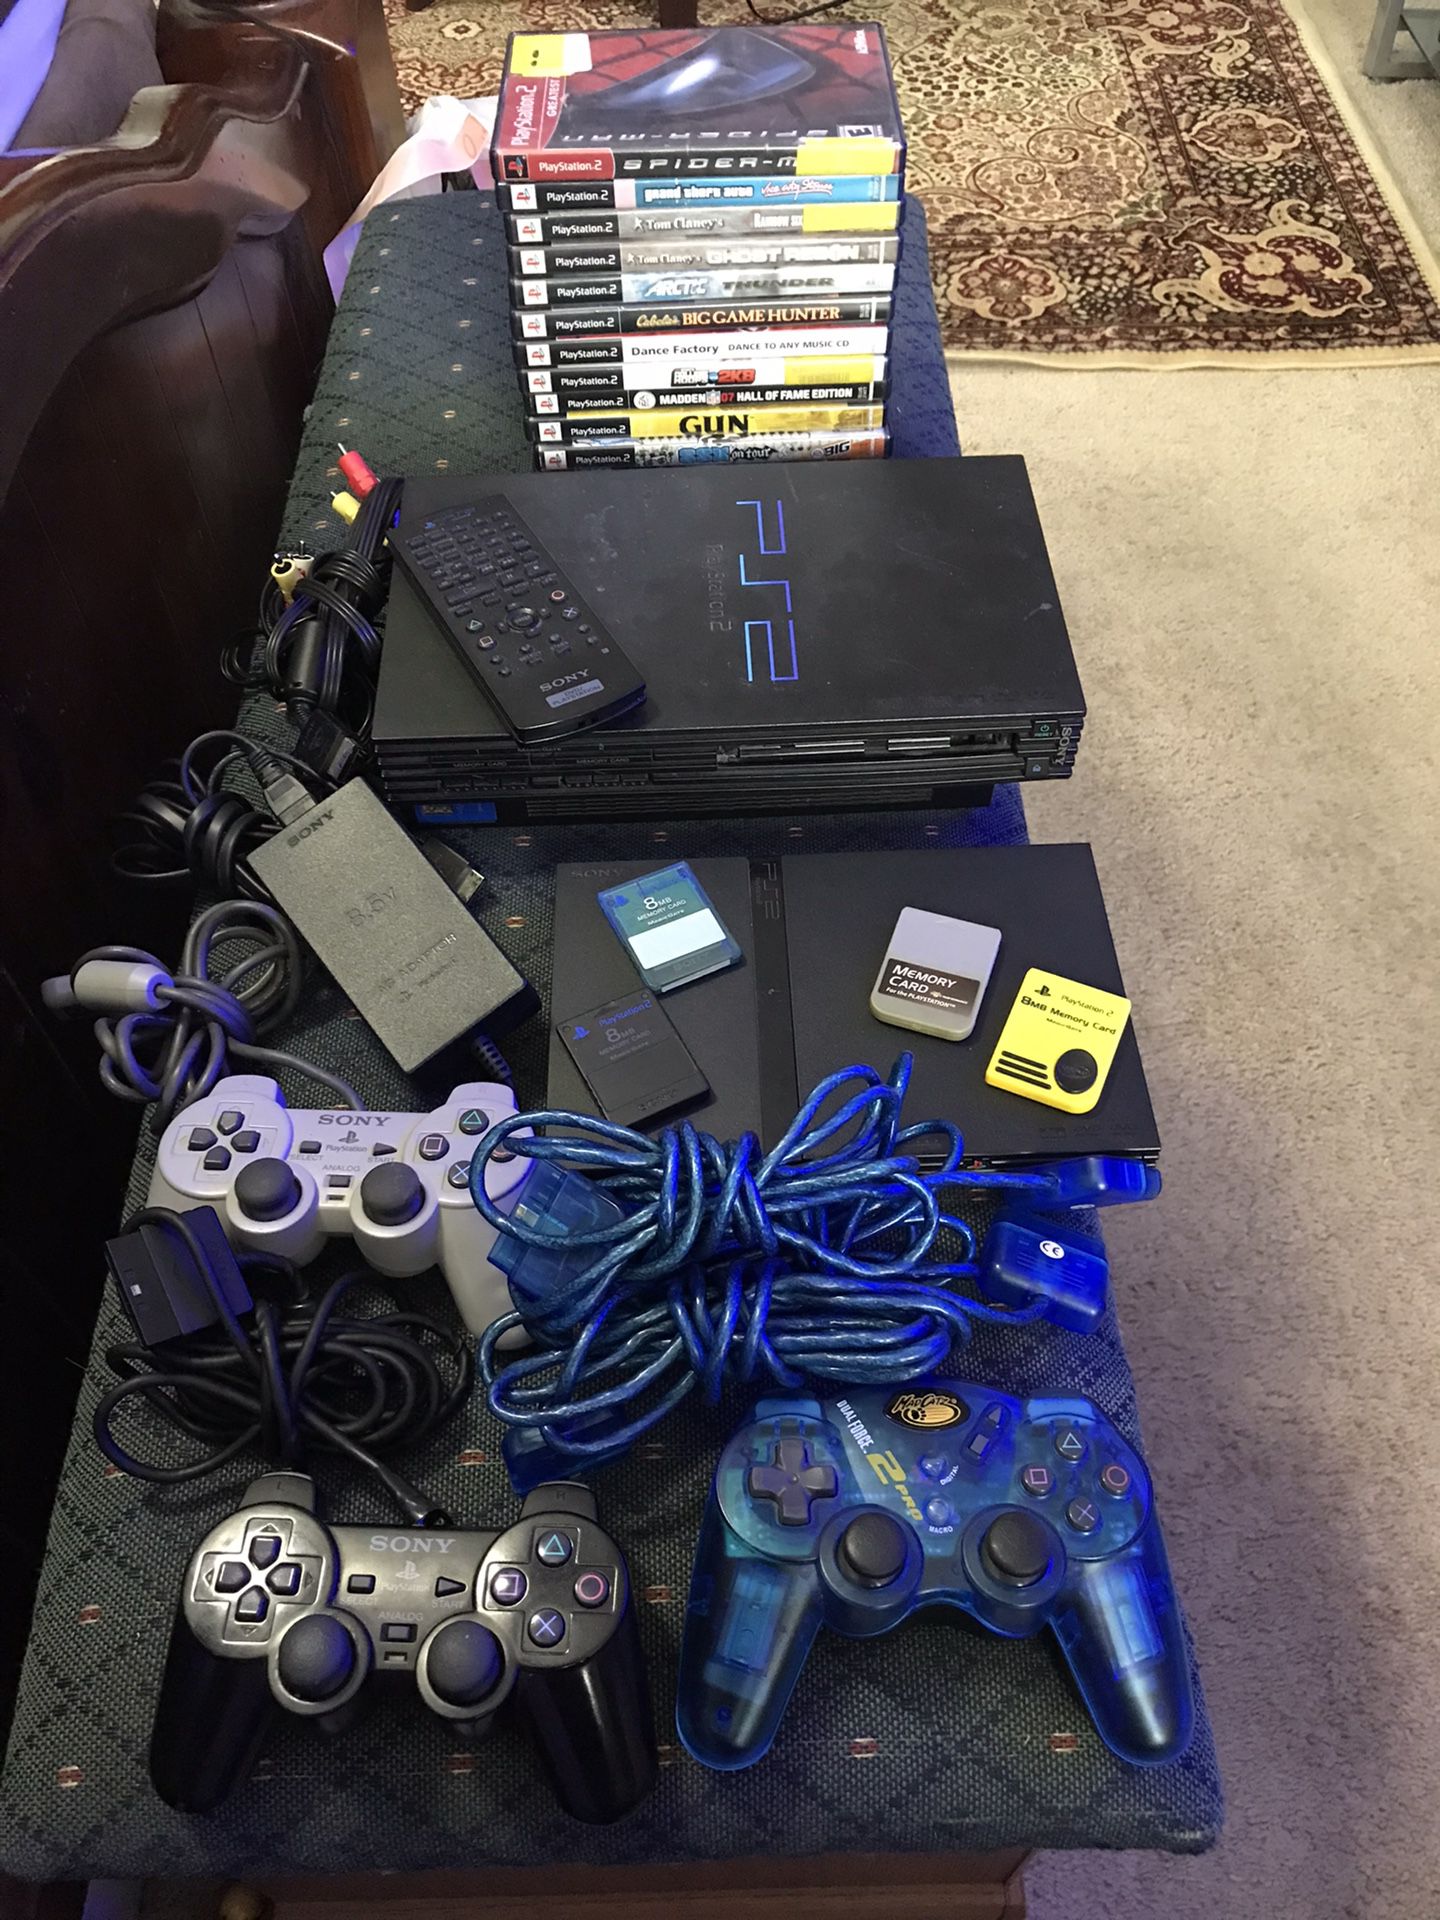 2x Ps2 Consoles w/ 13 games and extras